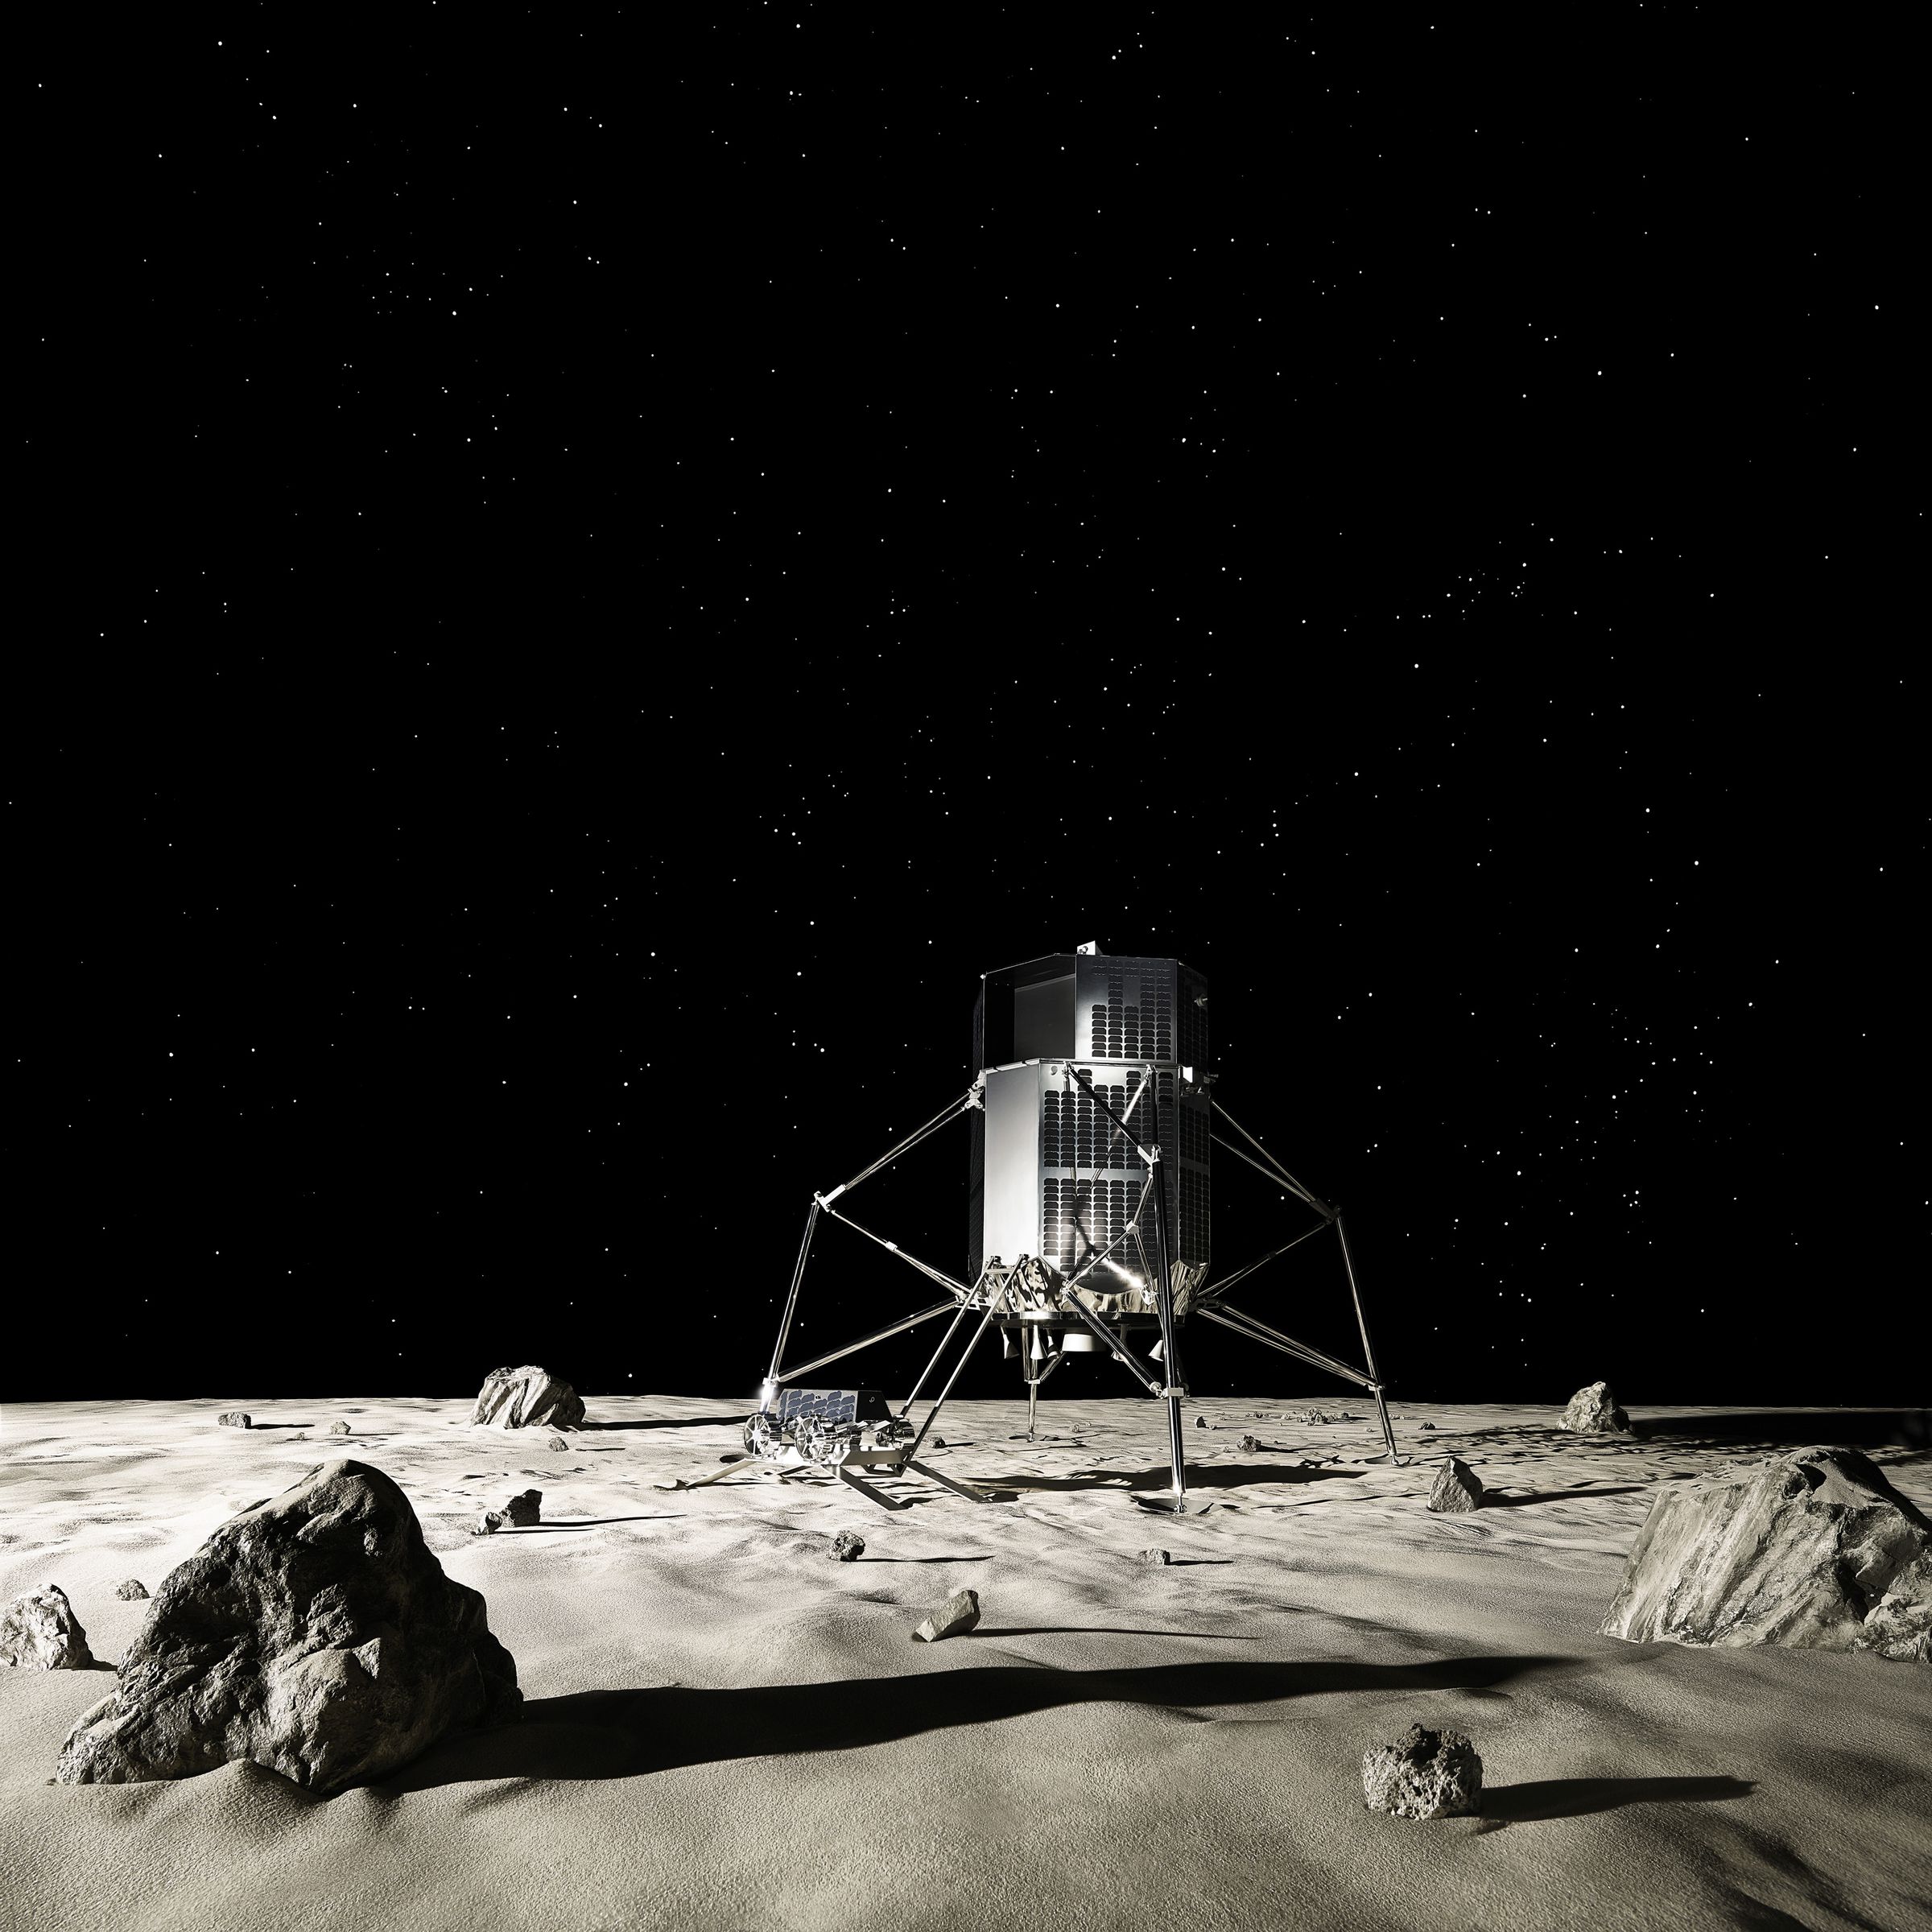 Japanese startup ispace plans to bring a solid-state battery to the Moon in 2021.